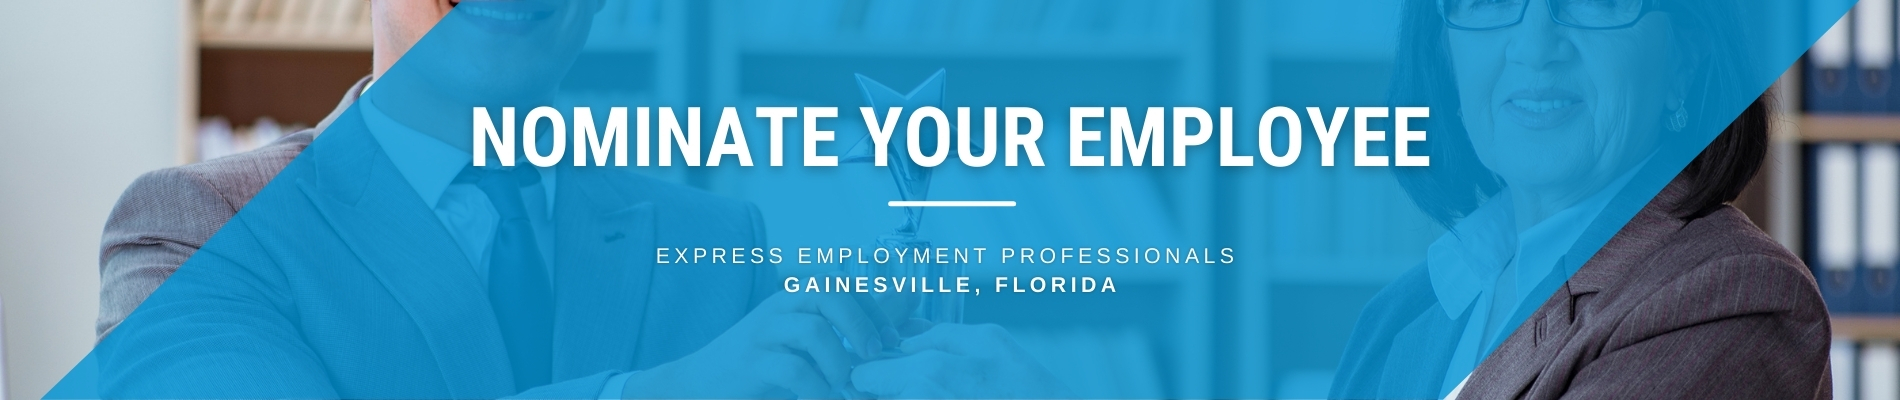 Nominate Your Employee Gainesville Staffing Firms